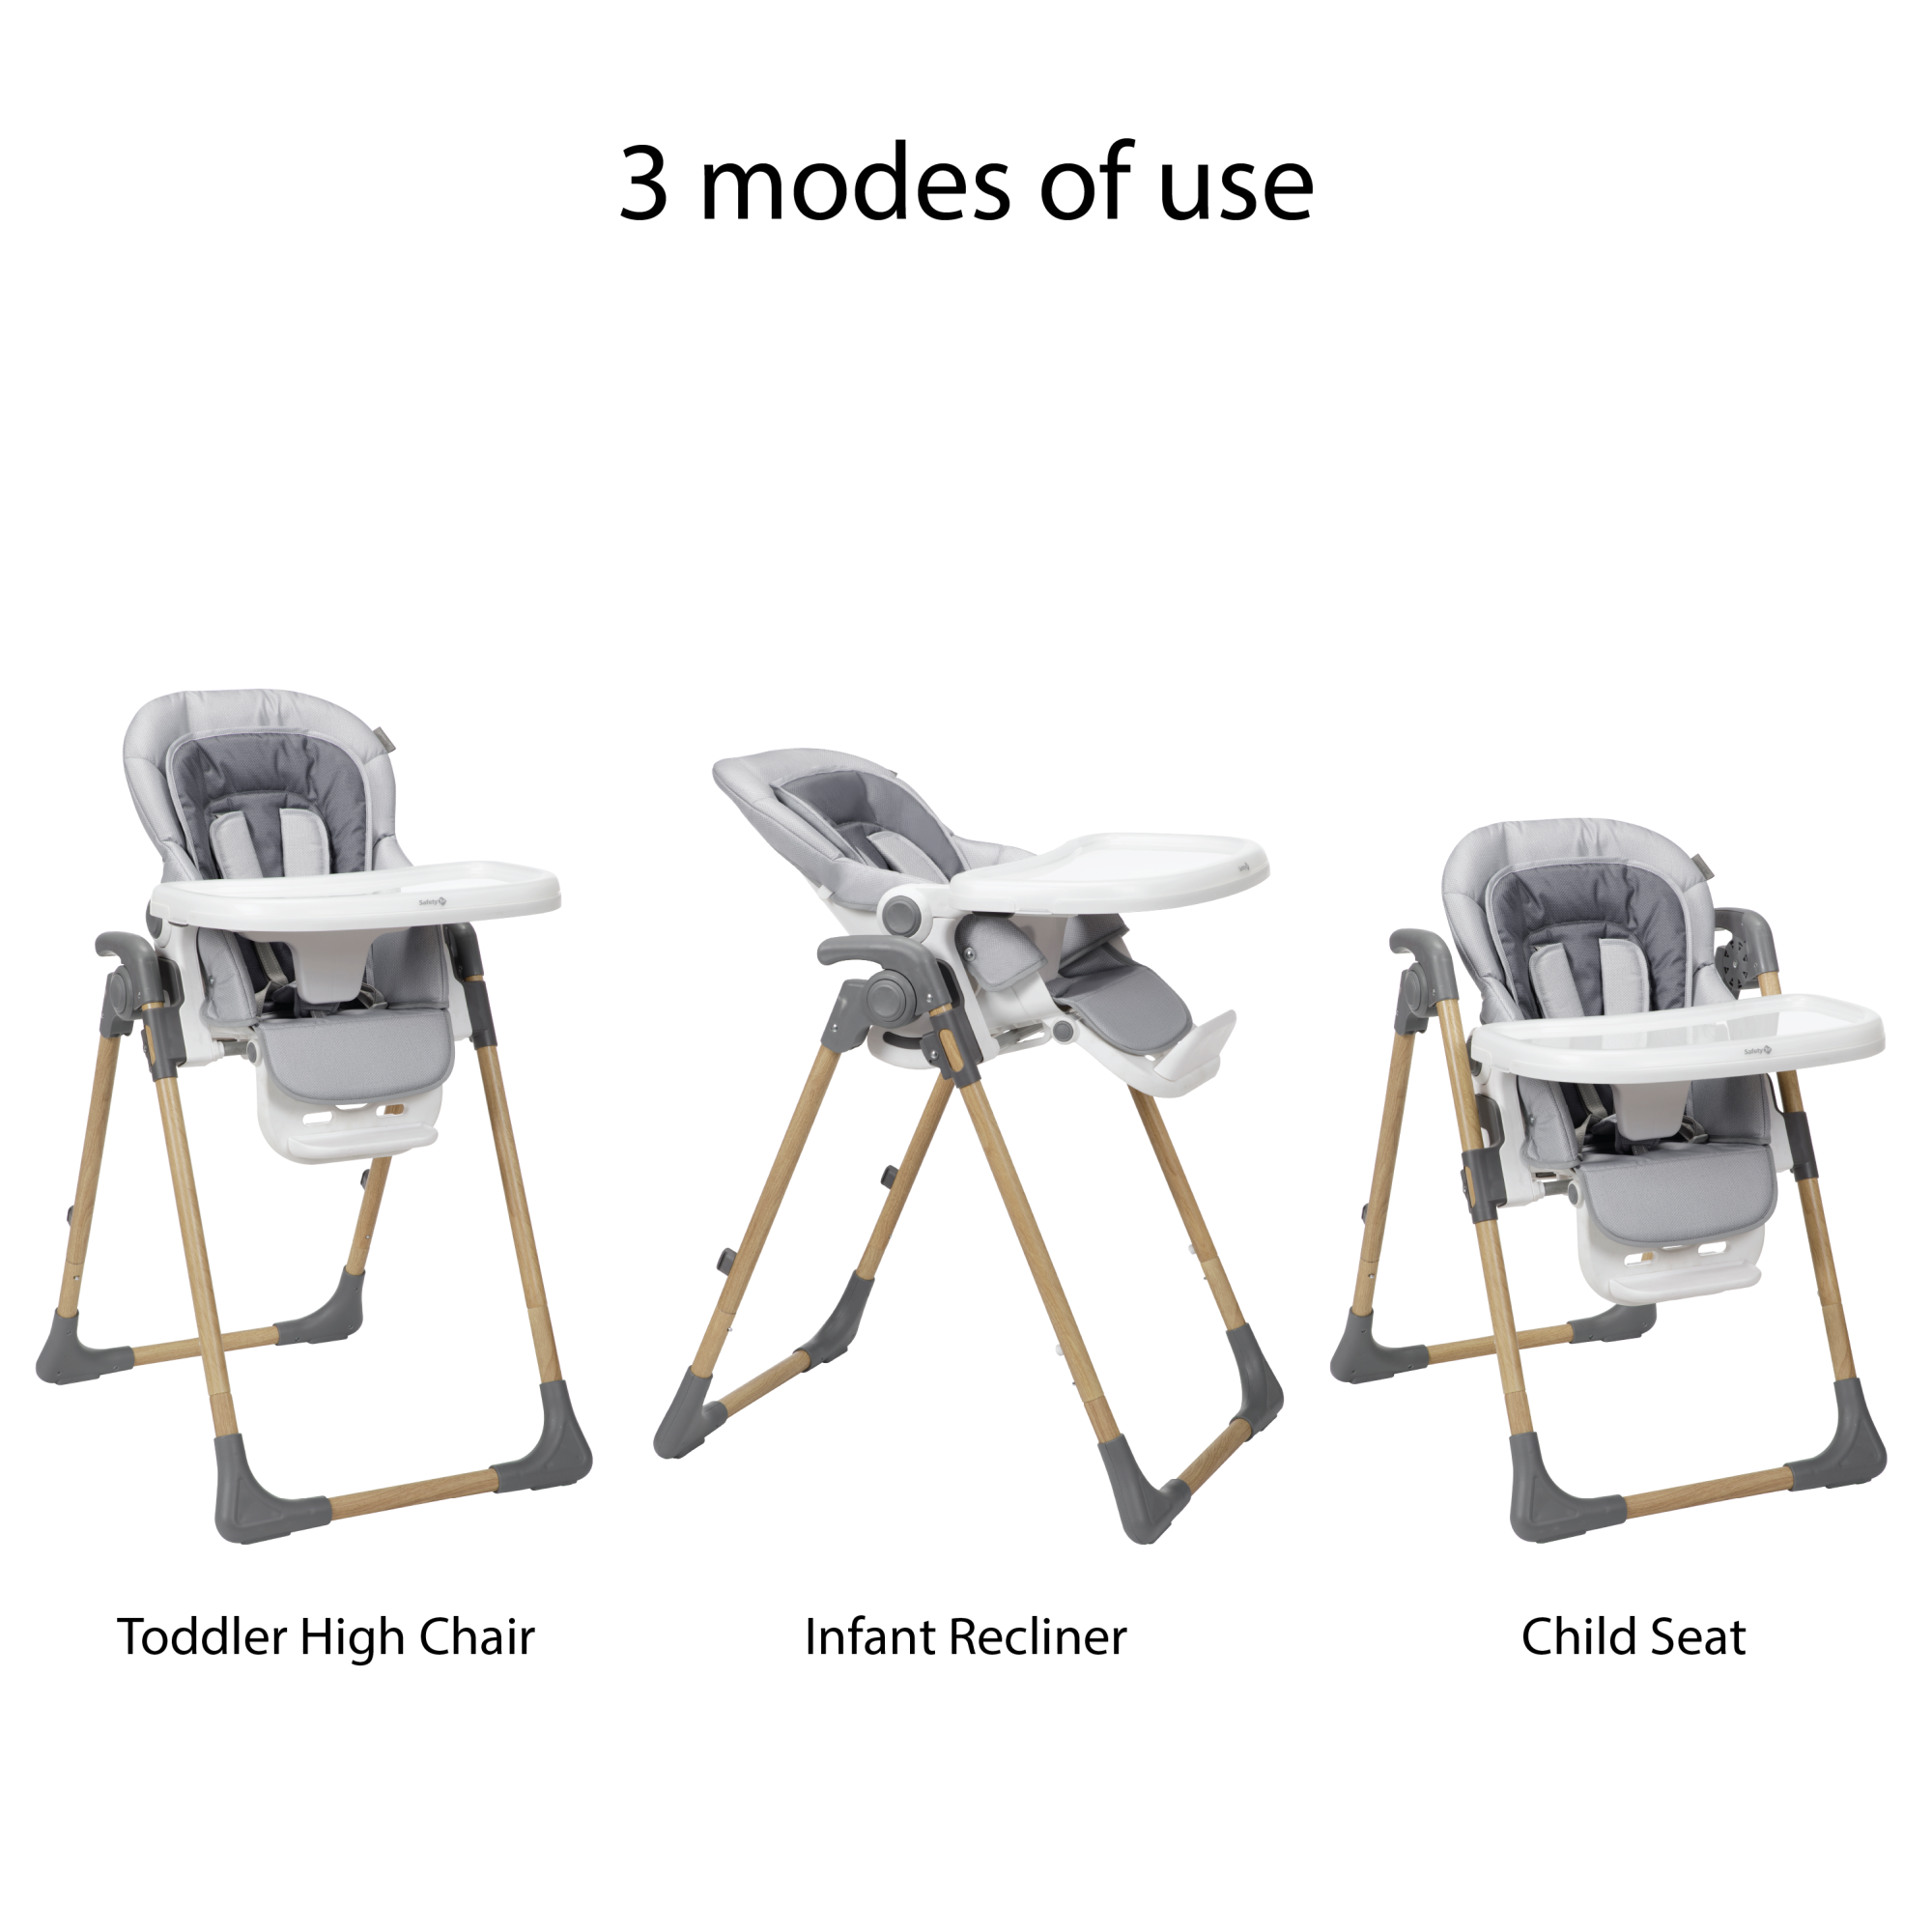 3-in-1 Grow and Go Plus High Chair - 3 modes of use - Toddler High Chair, Infant Recliner, Child Seat